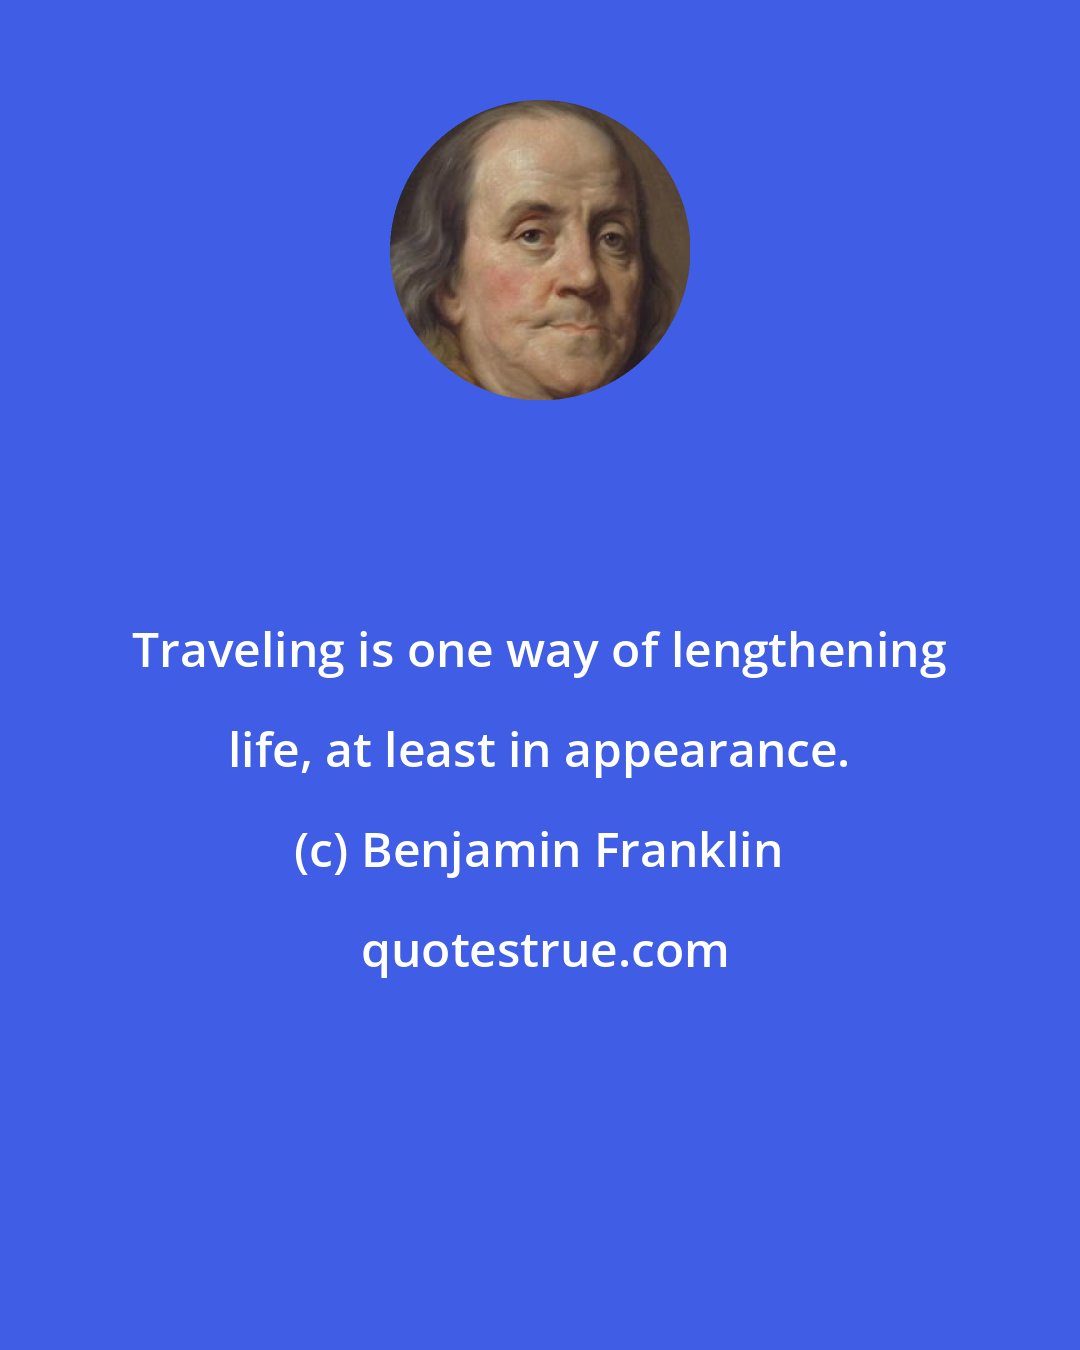 Benjamin Franklin: Traveling is one way of lengthening life, at least in appearance.